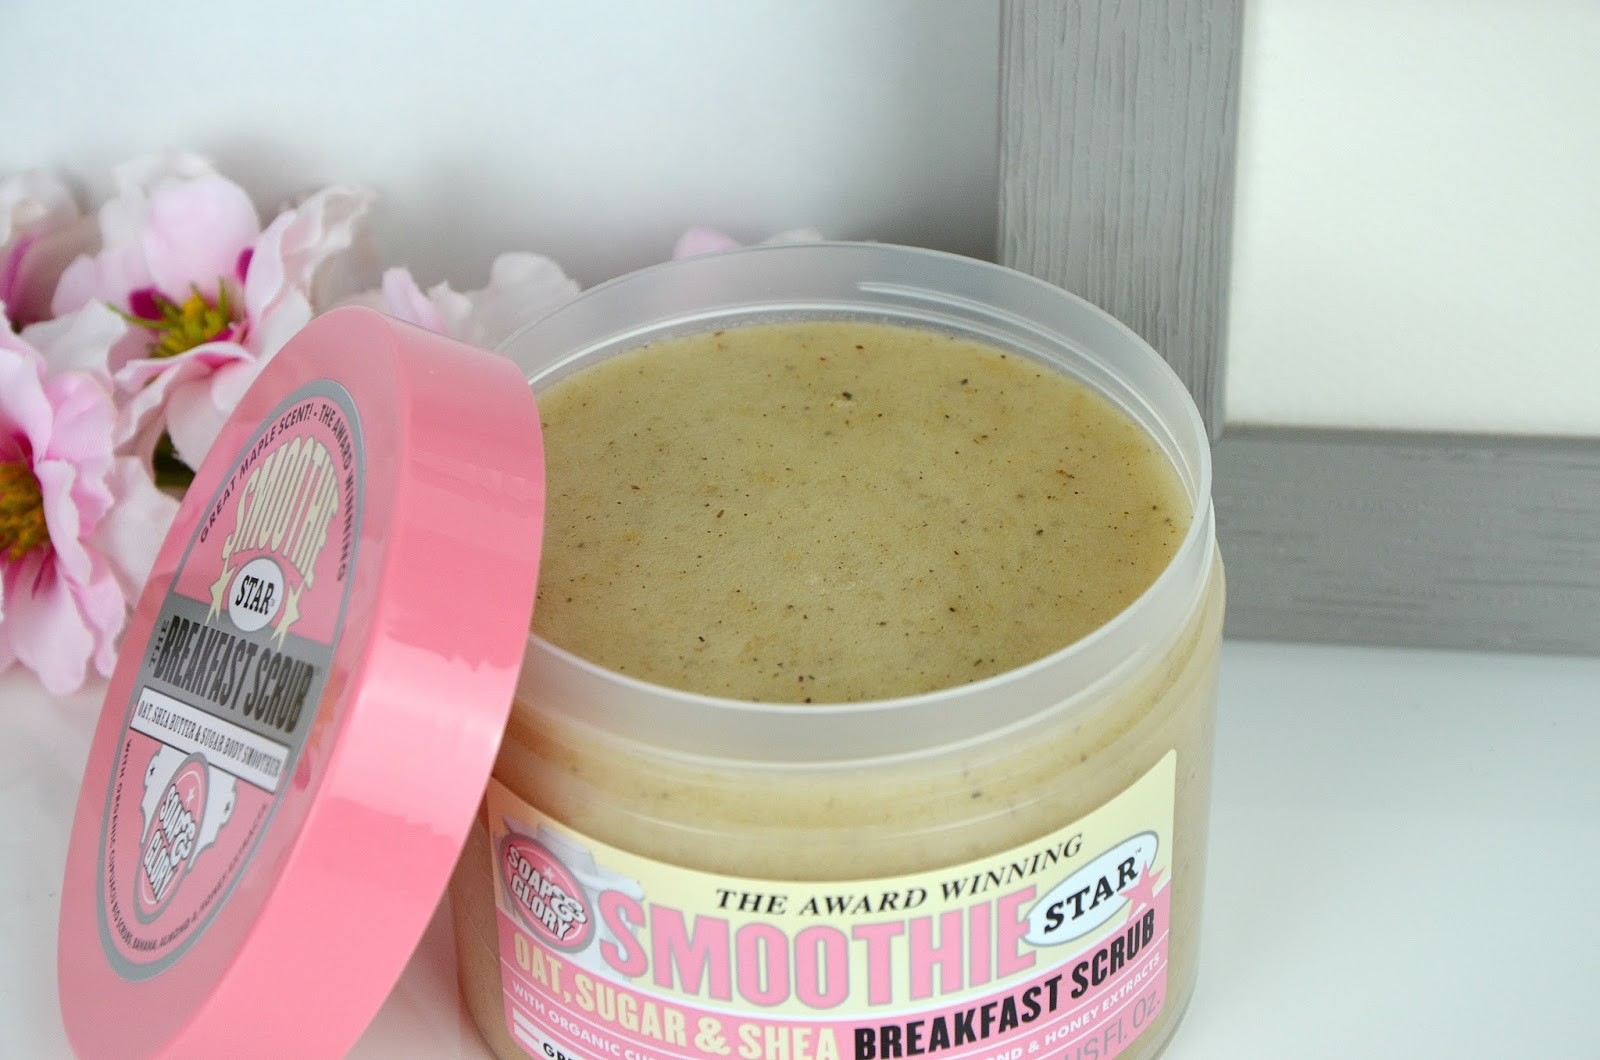 soap and glory Smoothie star breakfast scrub